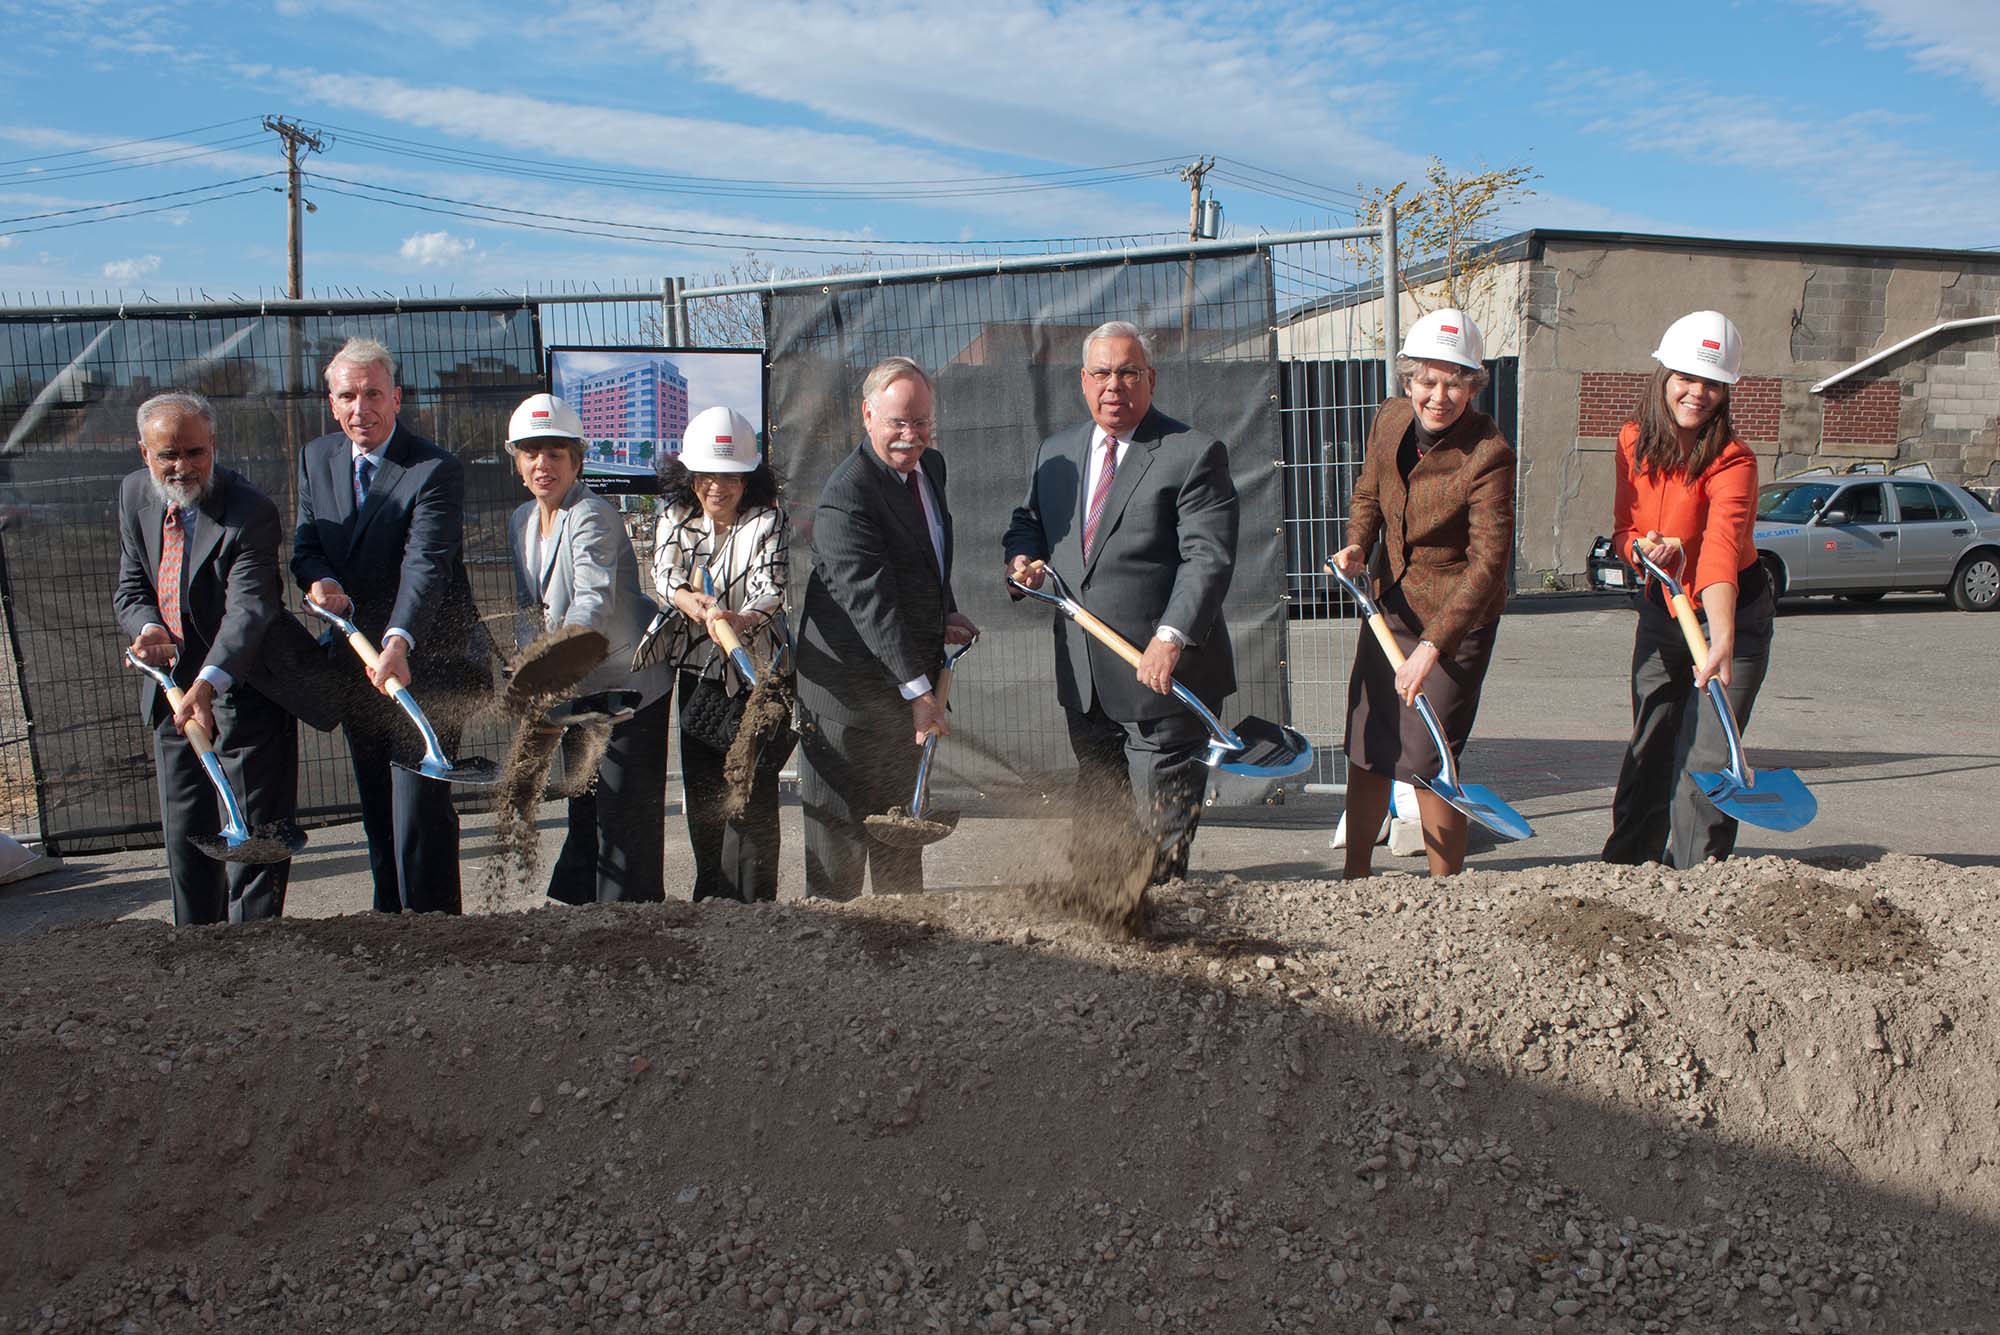 Photo of the groundbreaking for New Boston University School of Medicine. A group of people with shovels and hardhats stand in front of a pile of gray dirt; a green and gray chain link fence is seen behind them. The people seen, left to right, are: Ash Dahod Joe Fallon, Fallon Towle Associates Sherry Leventhal, BUSM Dean‚Äôs Advisory Board member Shamim Dahod, CAS'78 CGS'76 MED'87 BUSM Dean‚Äôs Advisory Board member and BU Overseer President Robert Brown Mayor Tom Menino Dean Karen Antman Catherine Spina, MED 2015 MD/Phd Candidate.